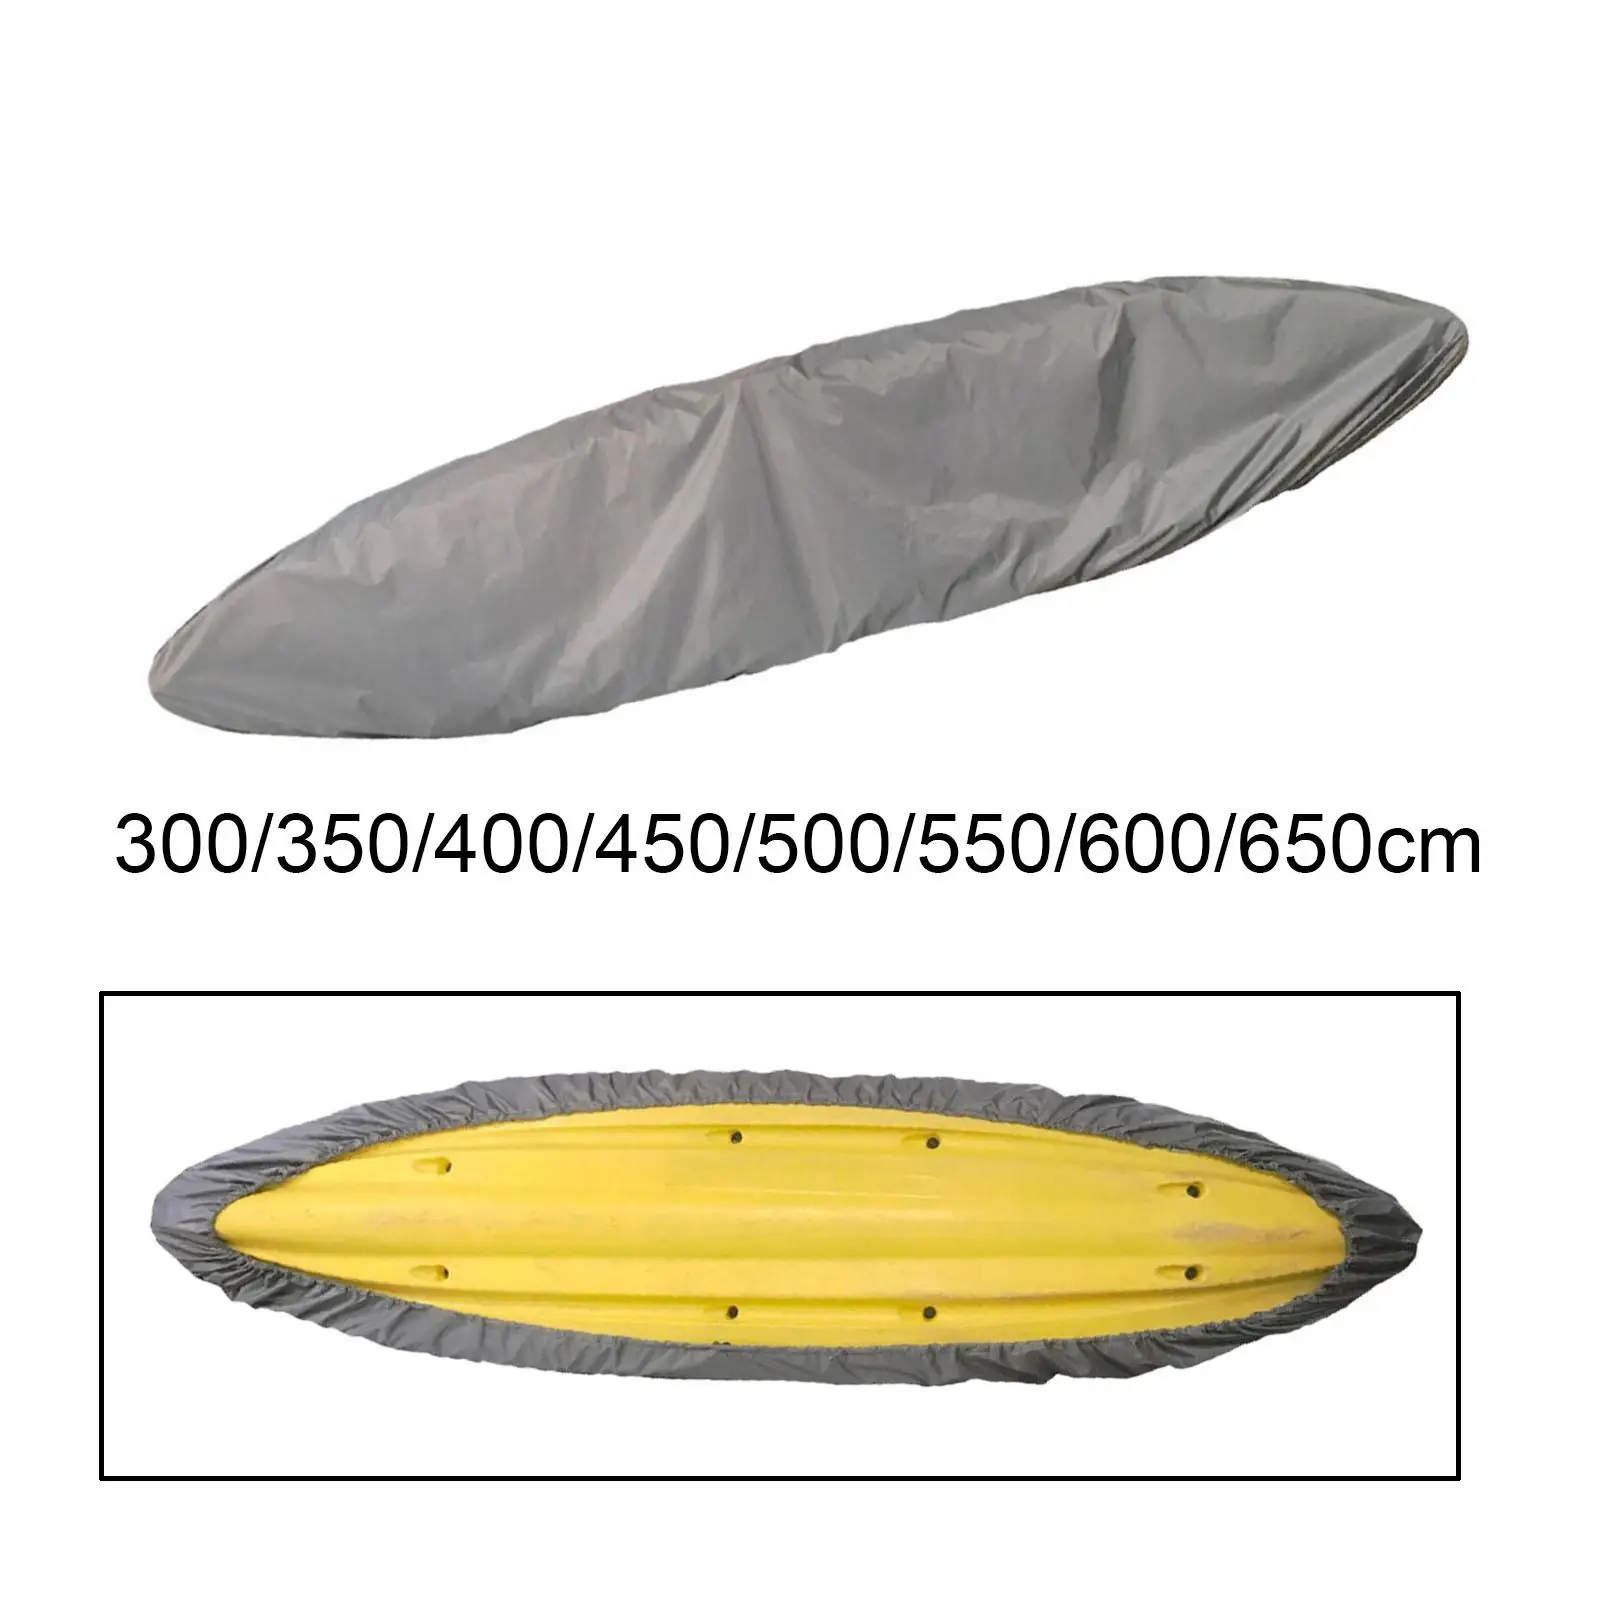 Kayak Cover, Boat Storage Dust Cover, Waterproof Dustproof Canoe Cover, Paddle Boards Cover